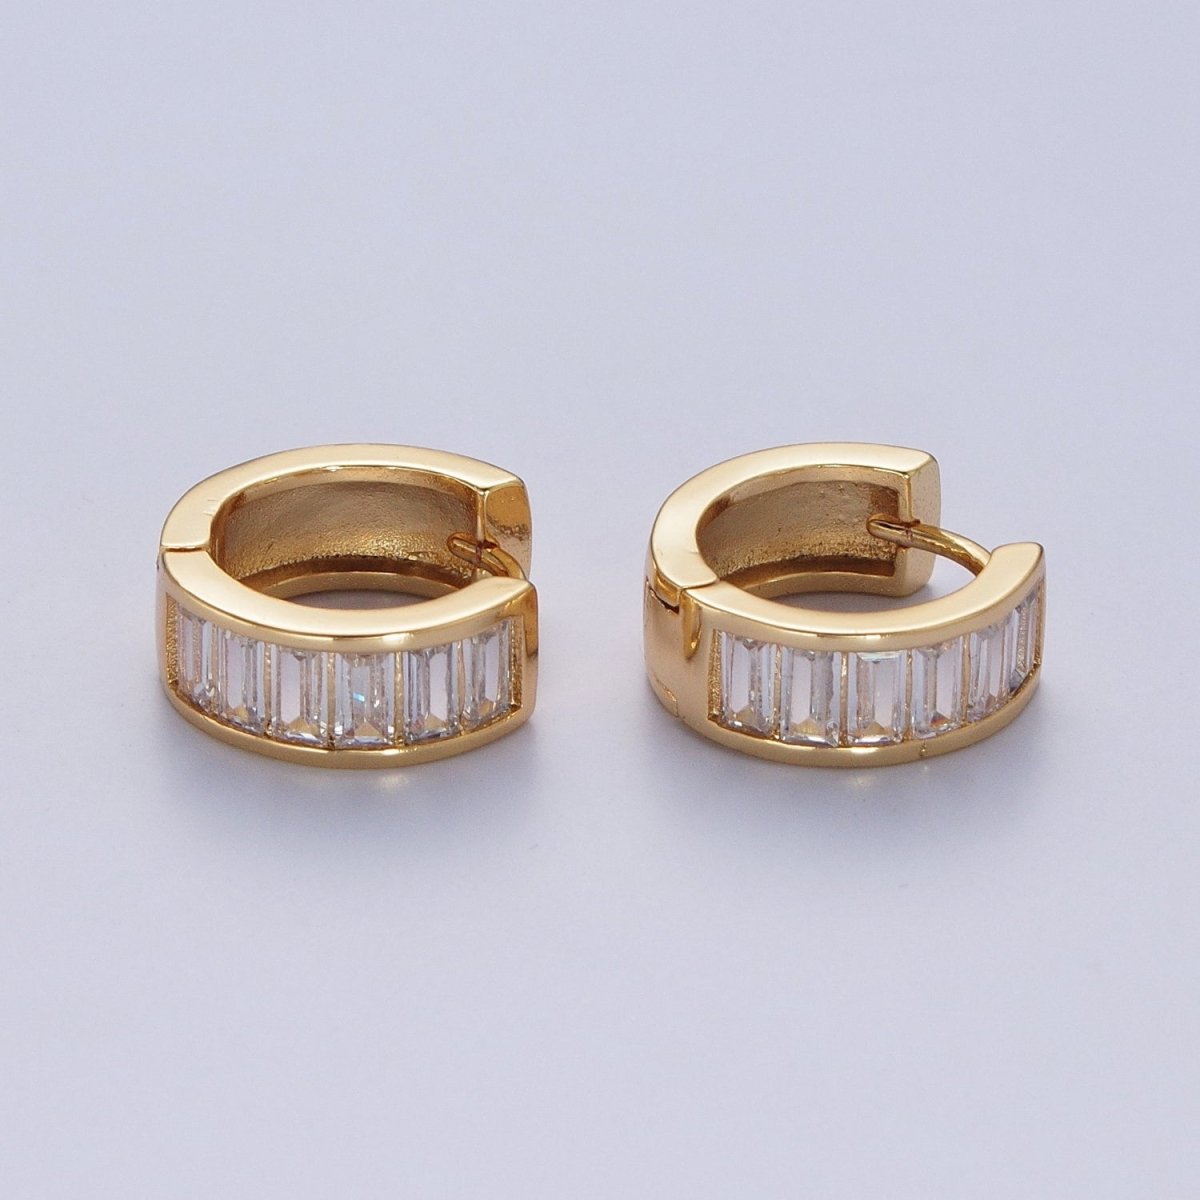 24K Gold Filled Clear Baguette Cubic Zirconia Simple Minimalist Small Hoops Gold Huggies Earrings Q-149 X-829 - DLUXCA